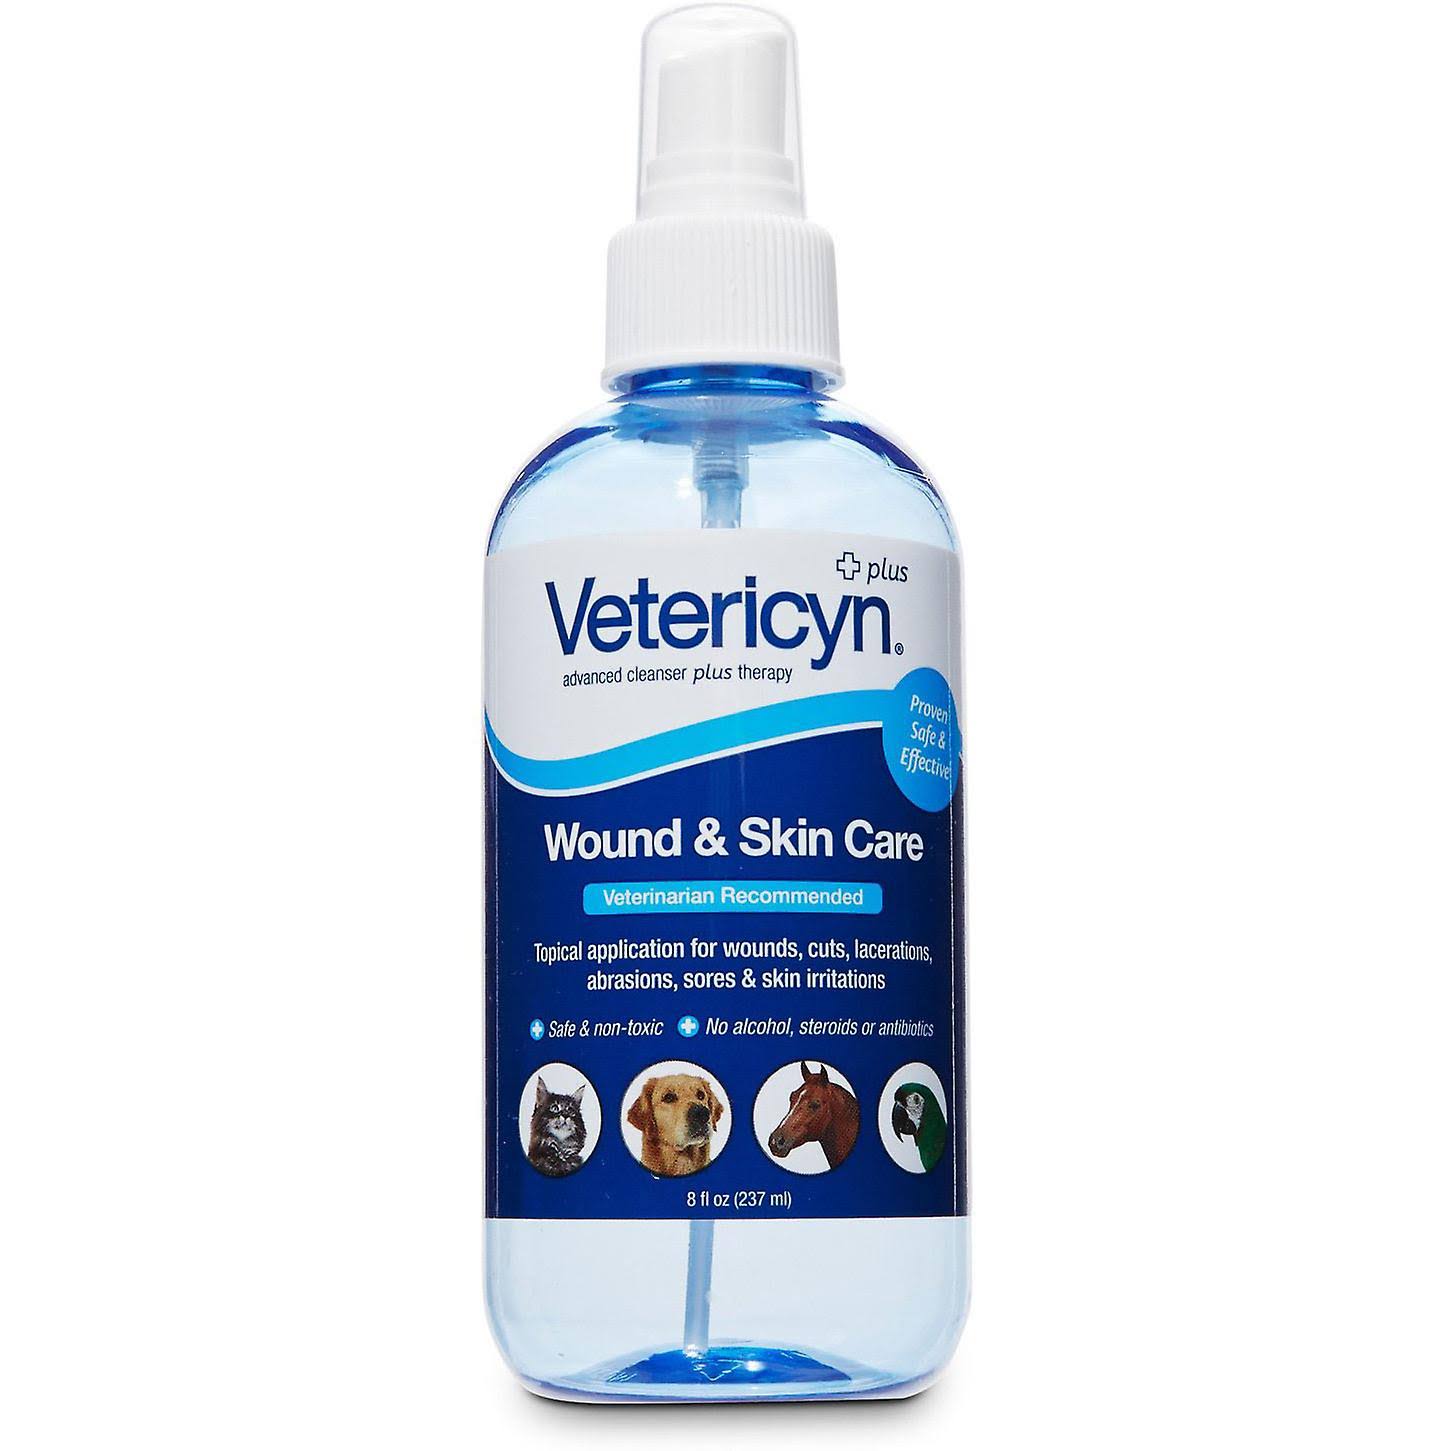 Vetericyn Plus All Animal Wound and Skin Care - 8oz